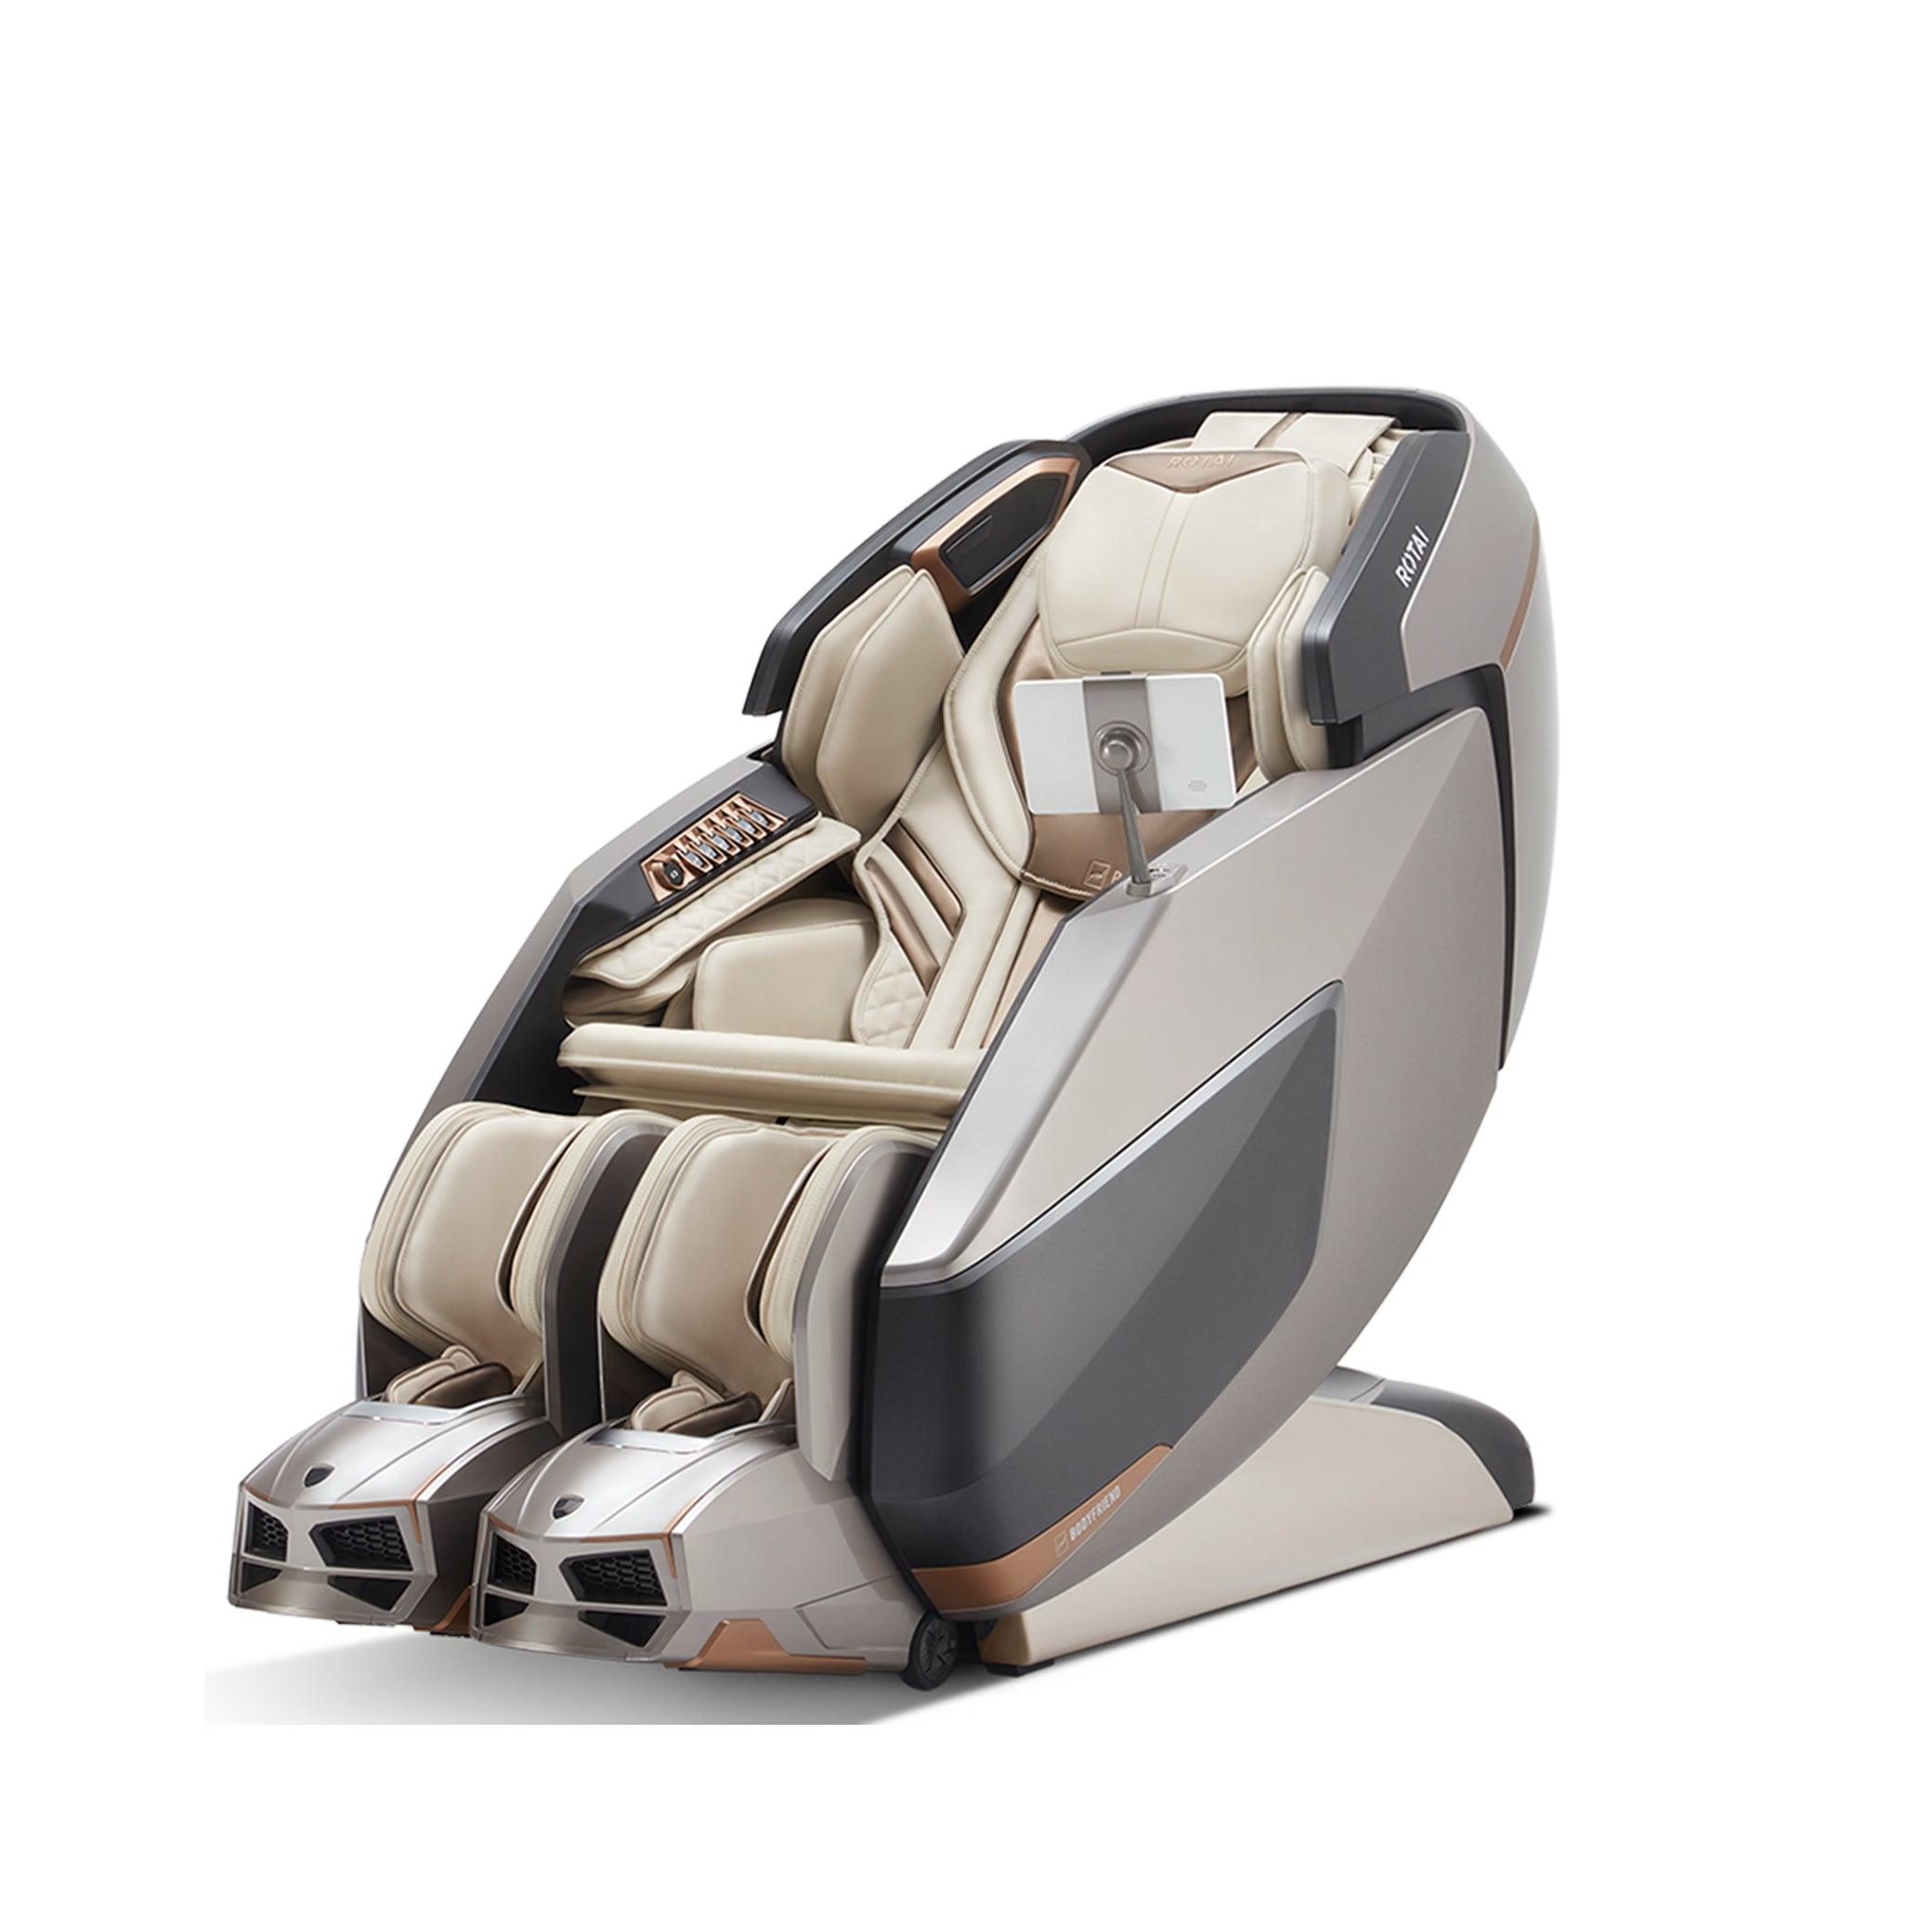 AI Robotic Massage Chair in Glacier Silver with Rovo-Walking Technology for best massage experience in UAE, Dubai, from massage chair shop. best massage chair uae, massage chair Dubai, massage chair uae, massage chair Saudi Arabia, كرسي التدليك, Best mass